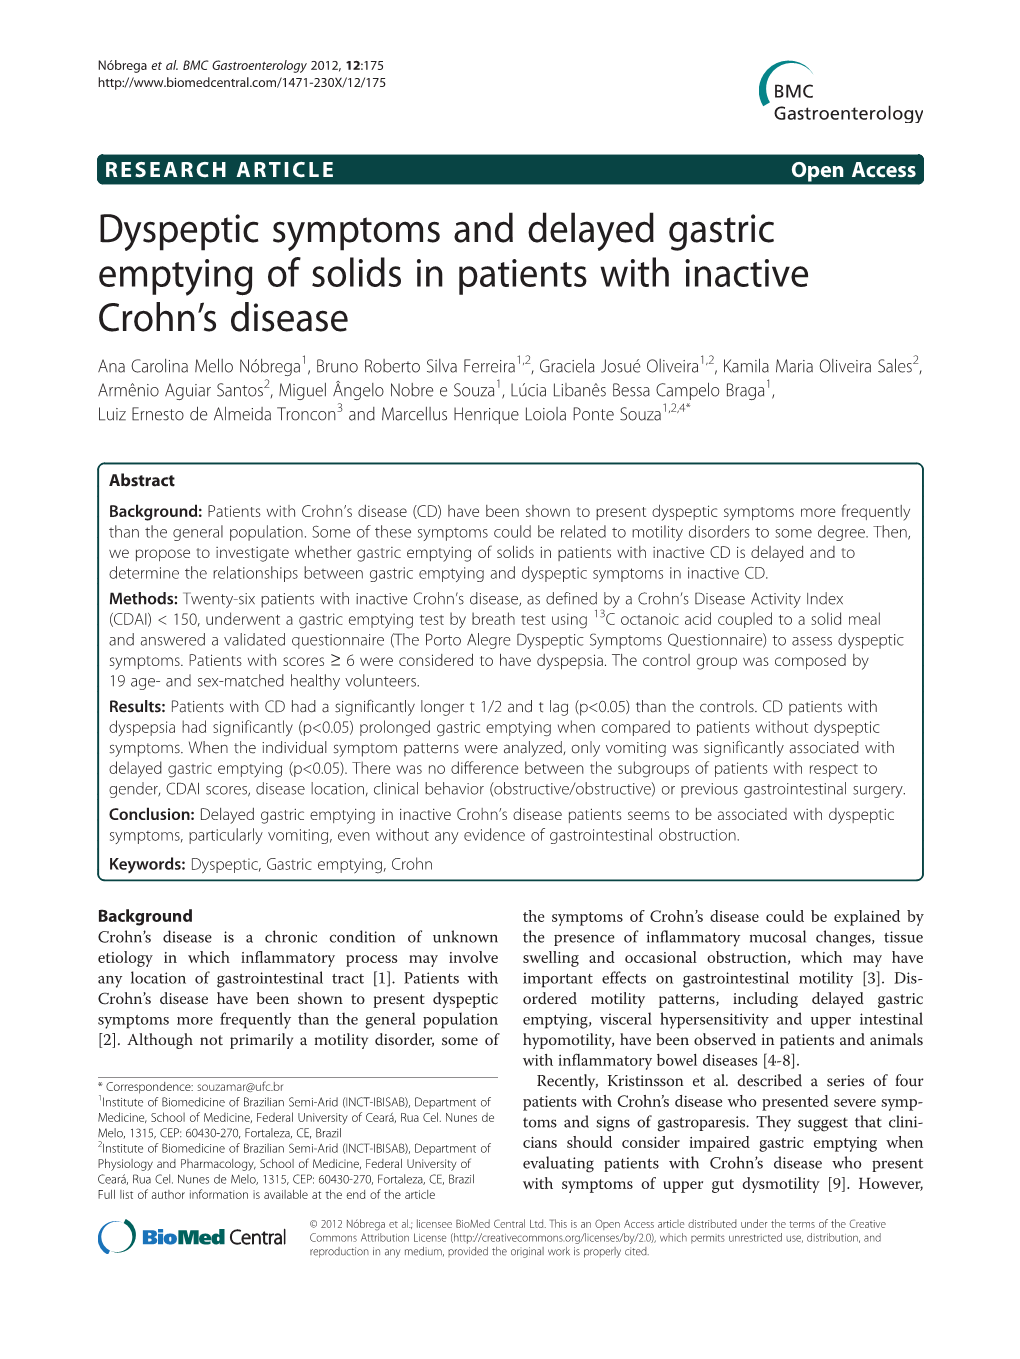 Dyspeptic Symptoms and Delayed Gastric Emptying of Solids In